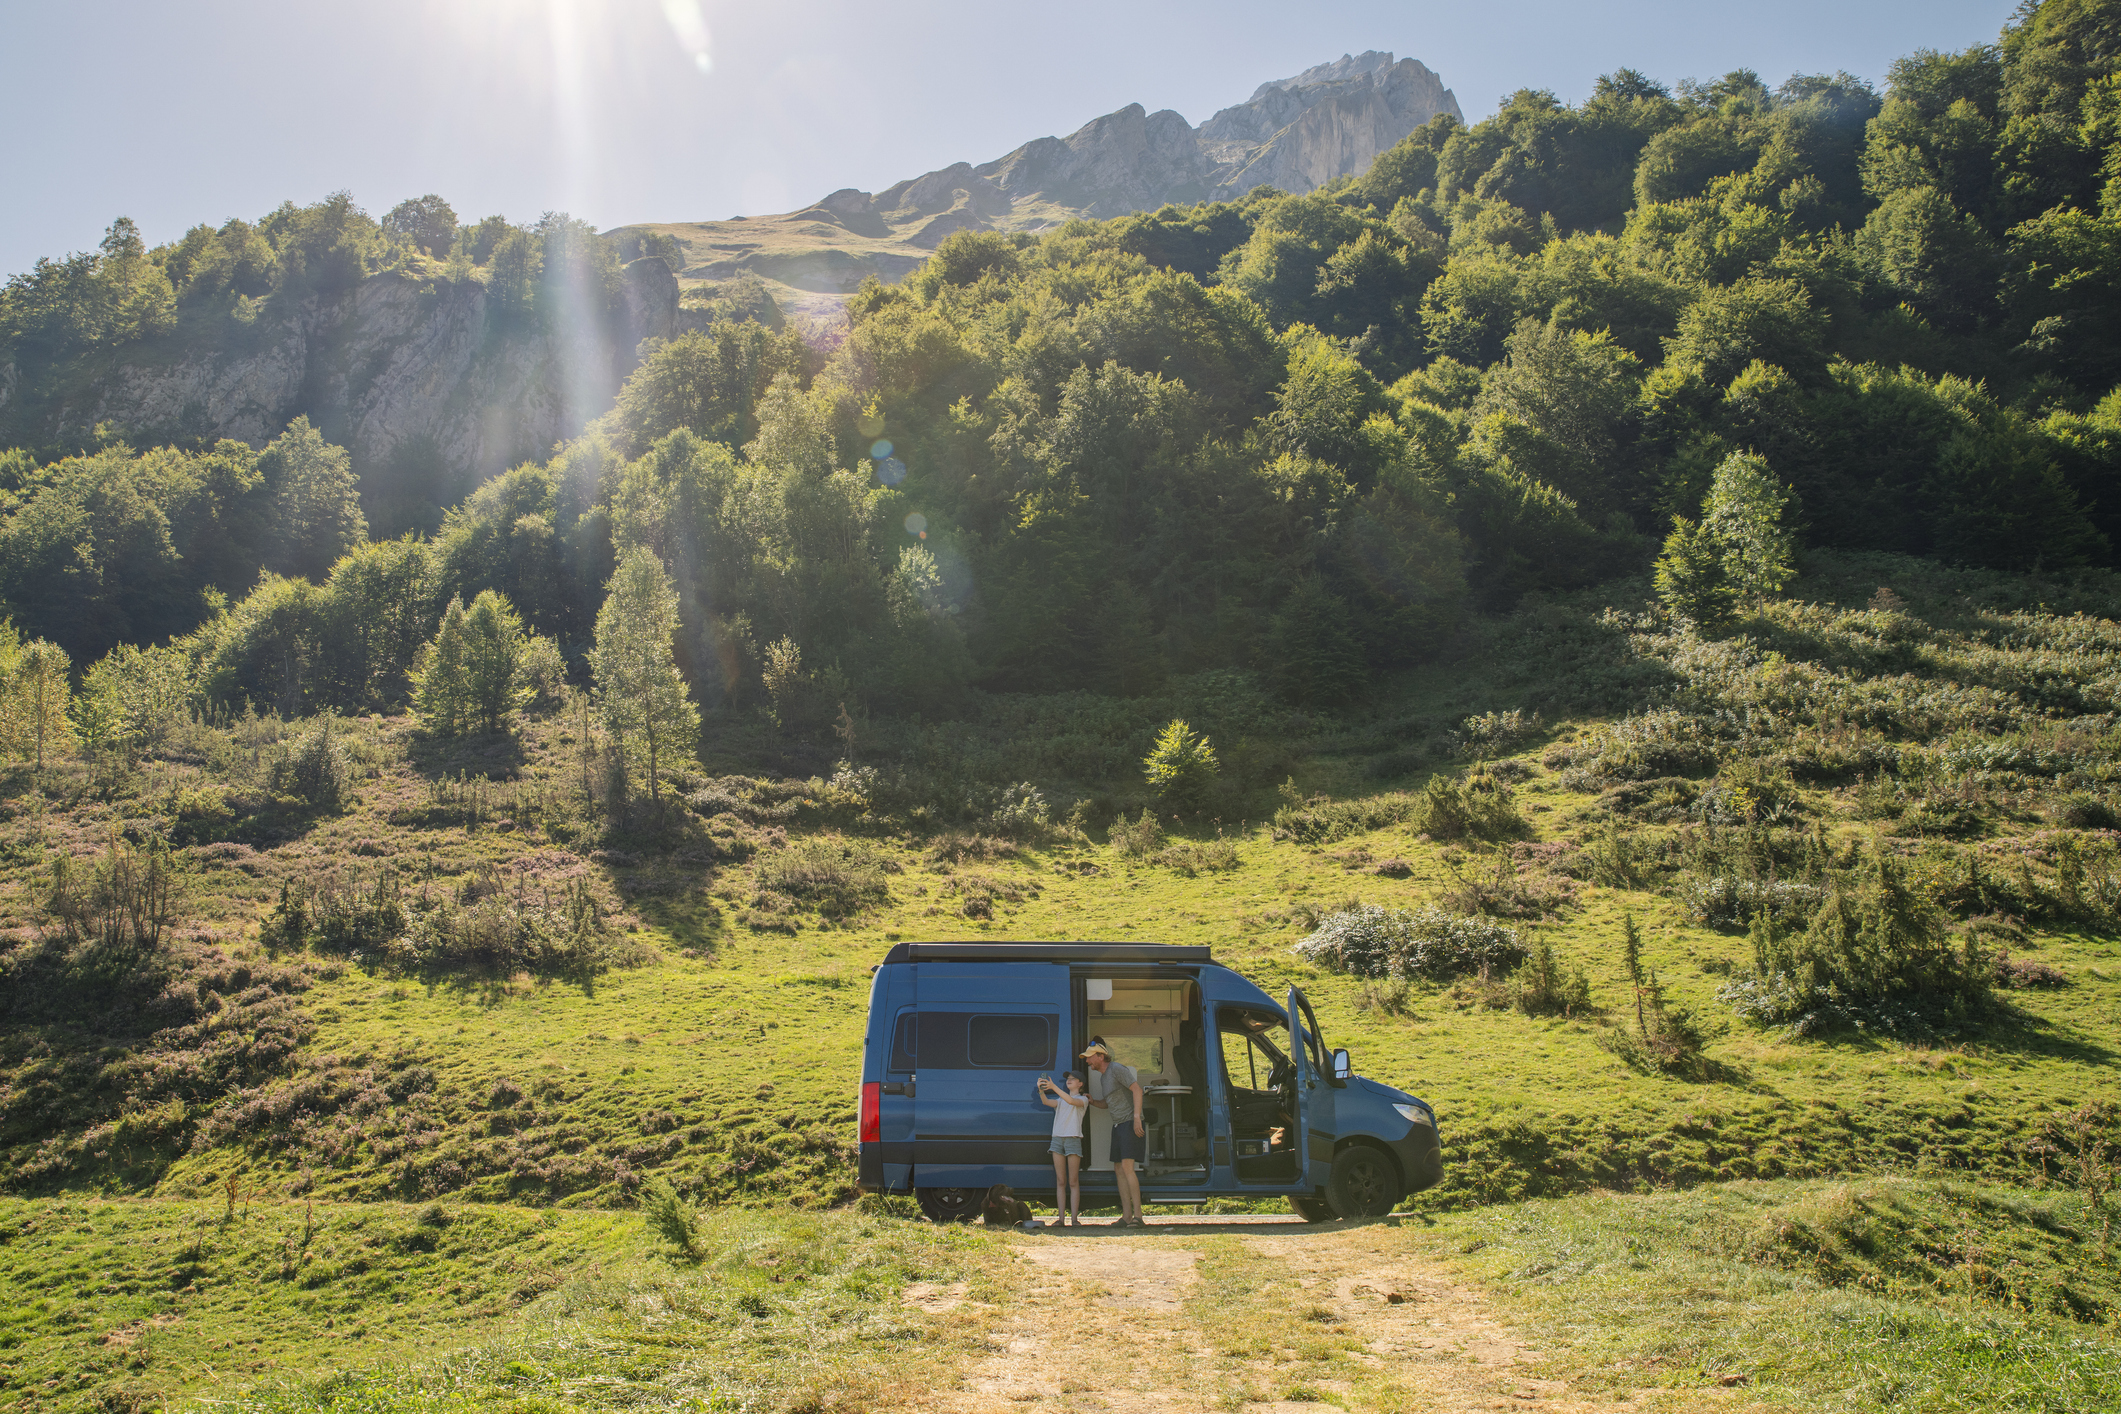 Haven’t gotten your fix yet? Consider RVing in Europe! Here are some easy routes to start with.